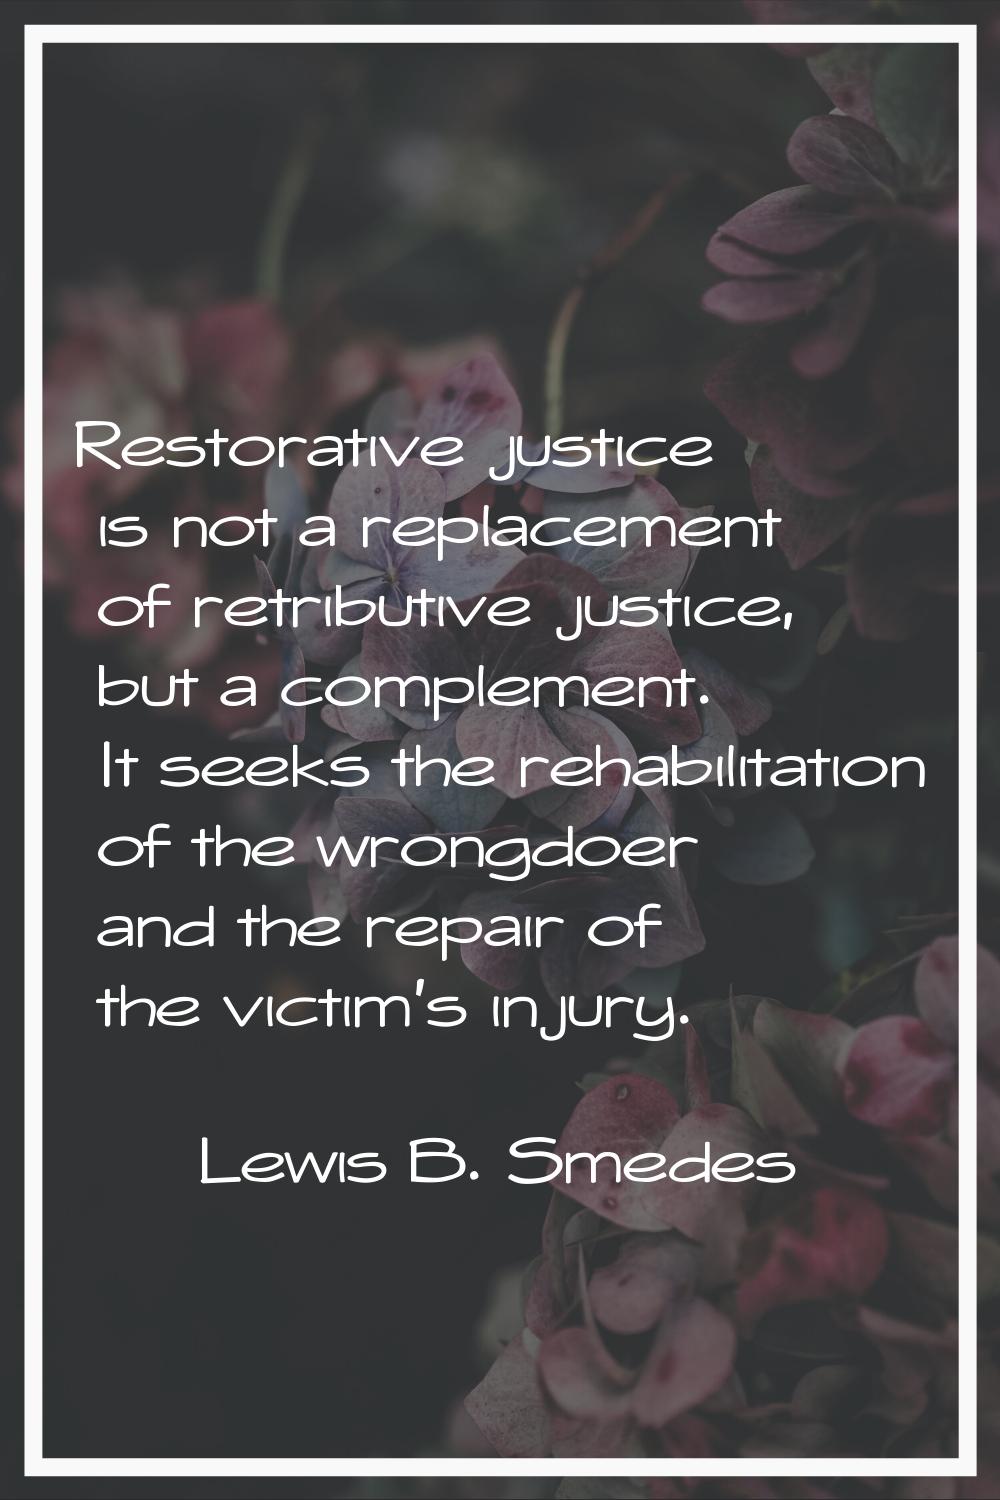 Restorative justice is not a replacement of retributive justice, but a complement. It seeks the reh